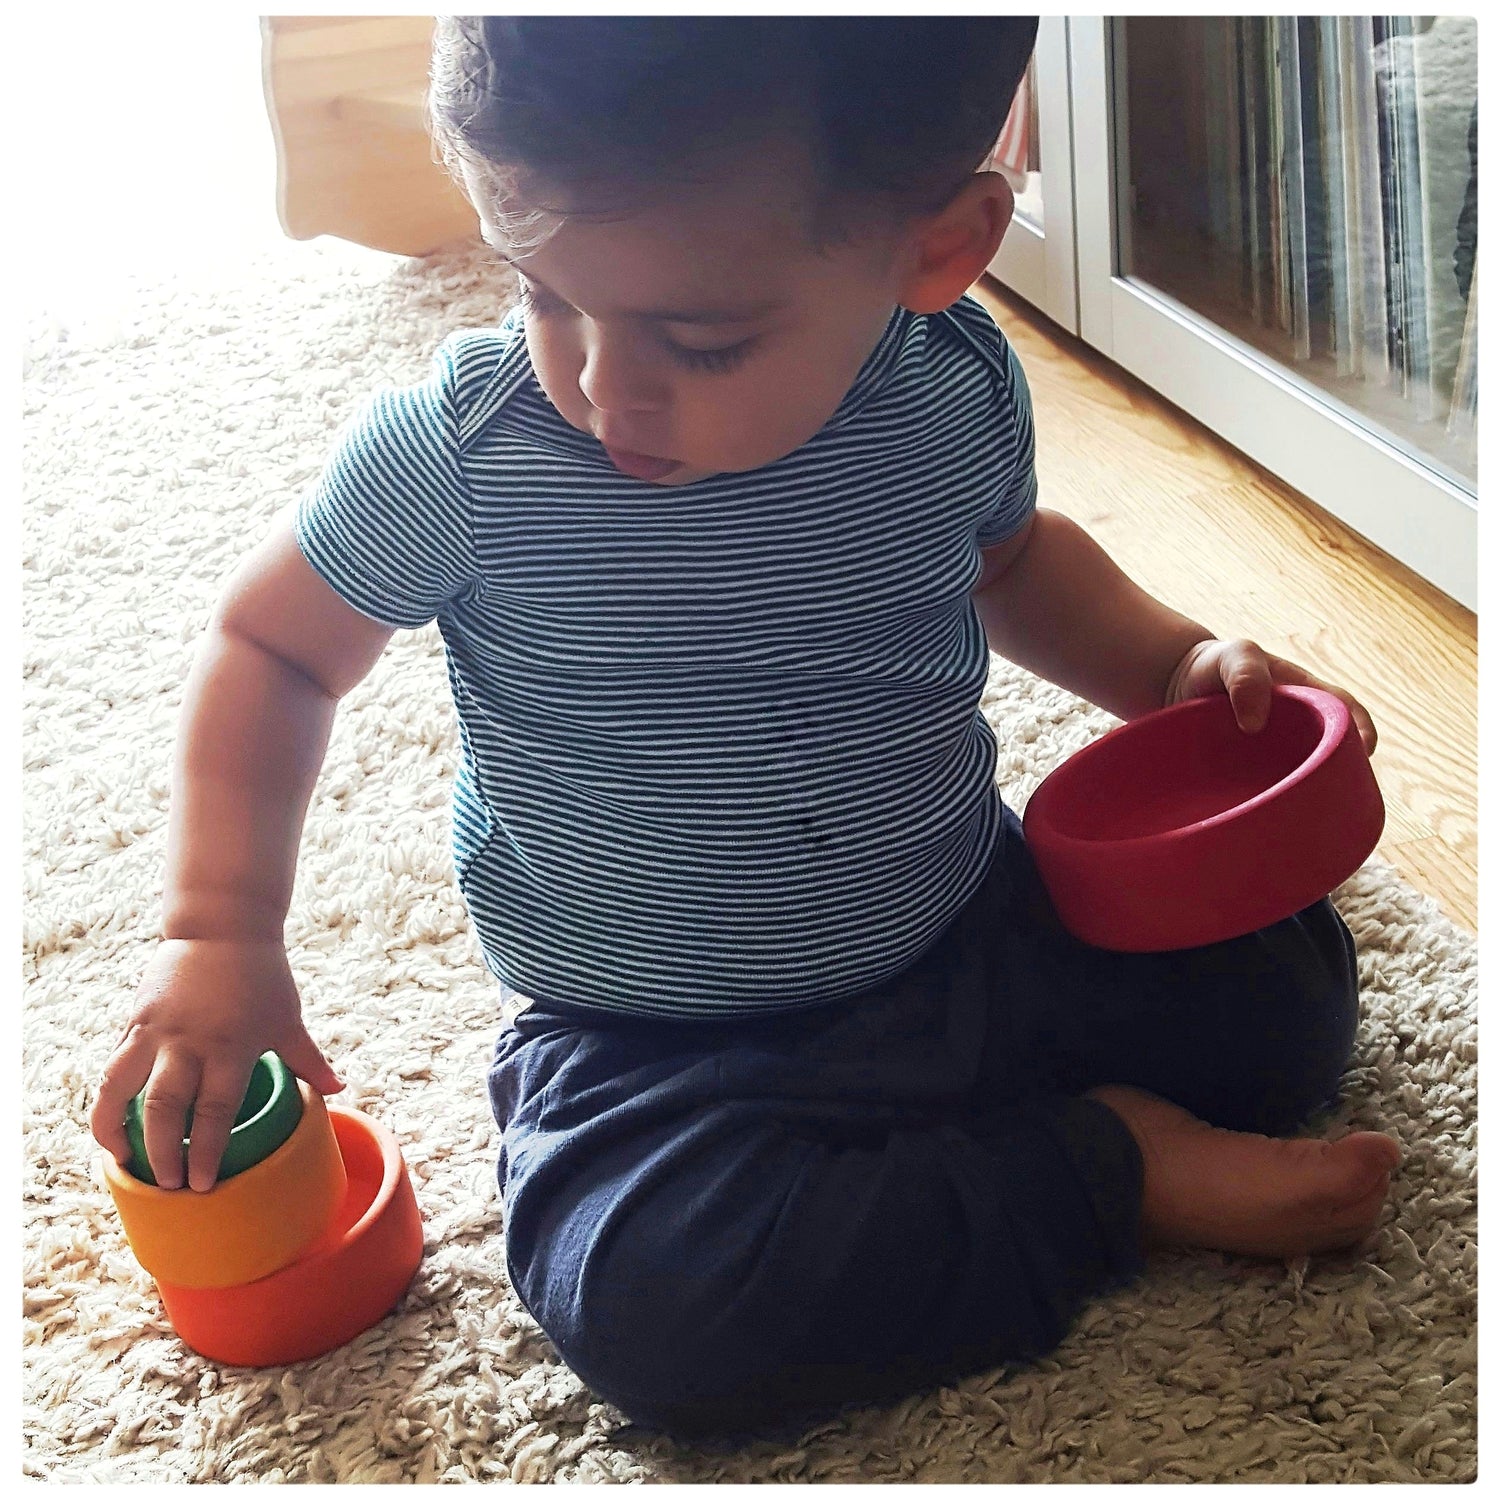 A 15 month old toddler sits on the floor and plays with a rainbow wooden nesting bowls toy from his toy subscription box.